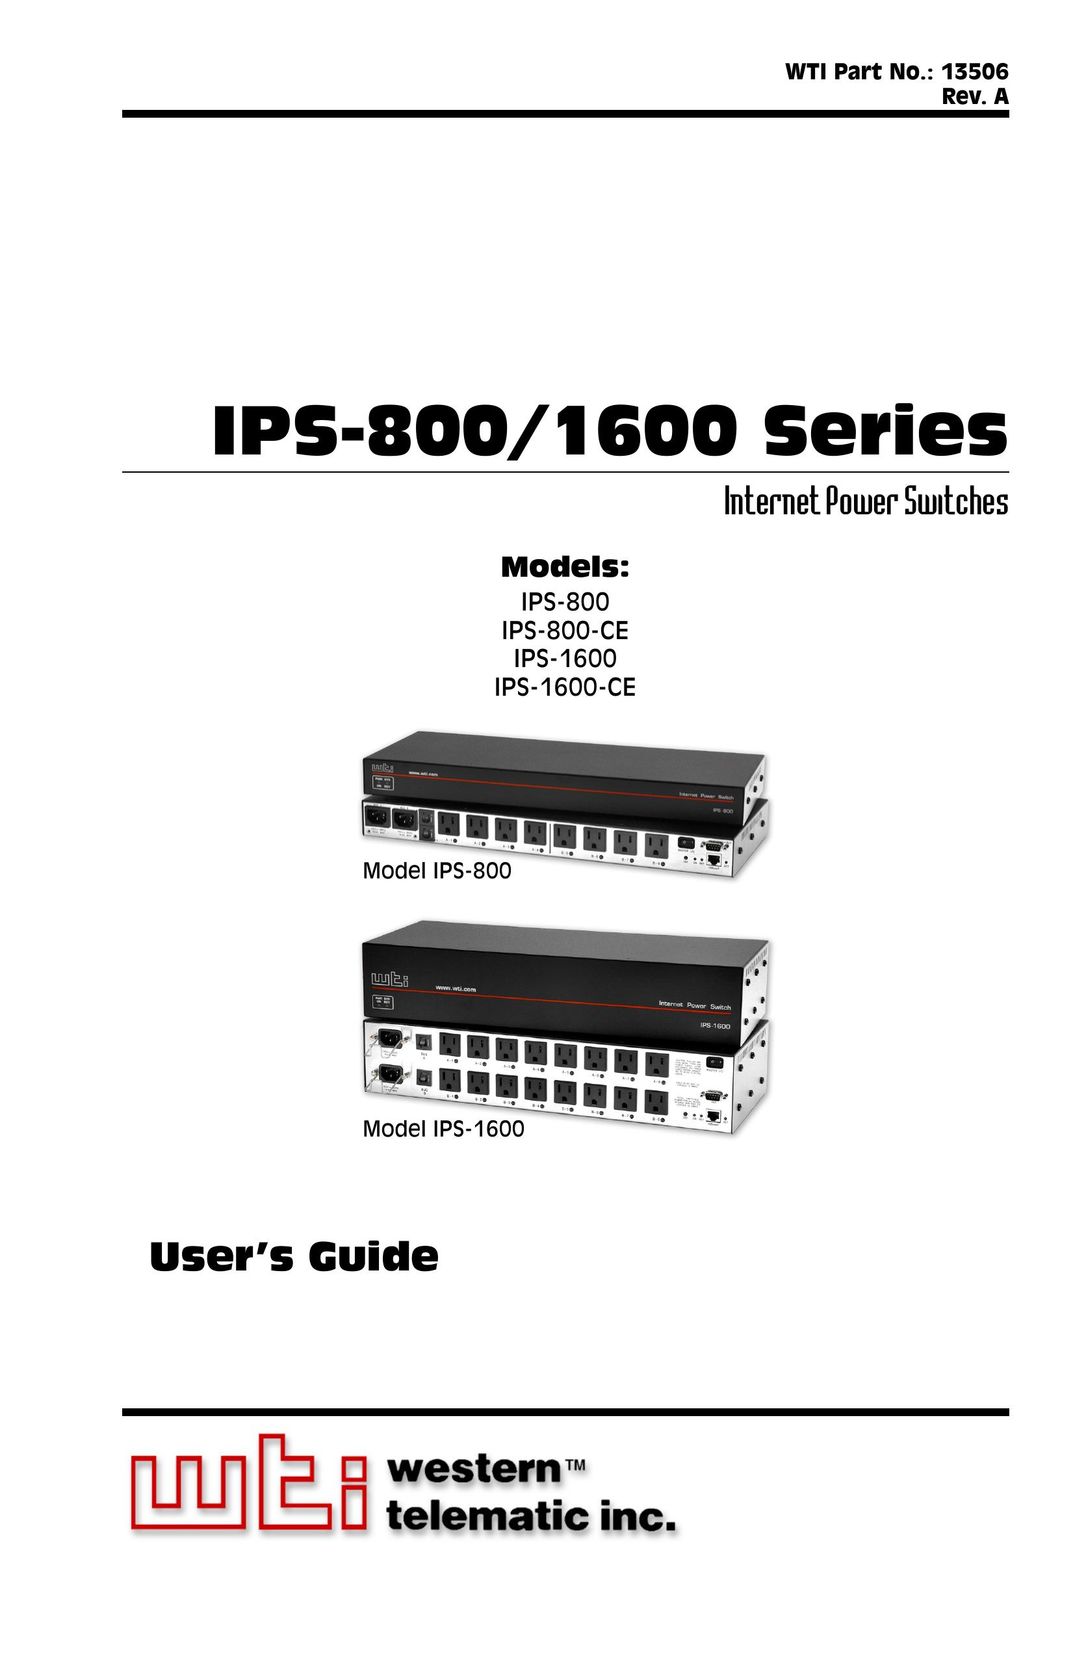 Western Telematic IPS-800, IPS-800-CE, IPS-1600, IPS-1600CE Switch User Manual